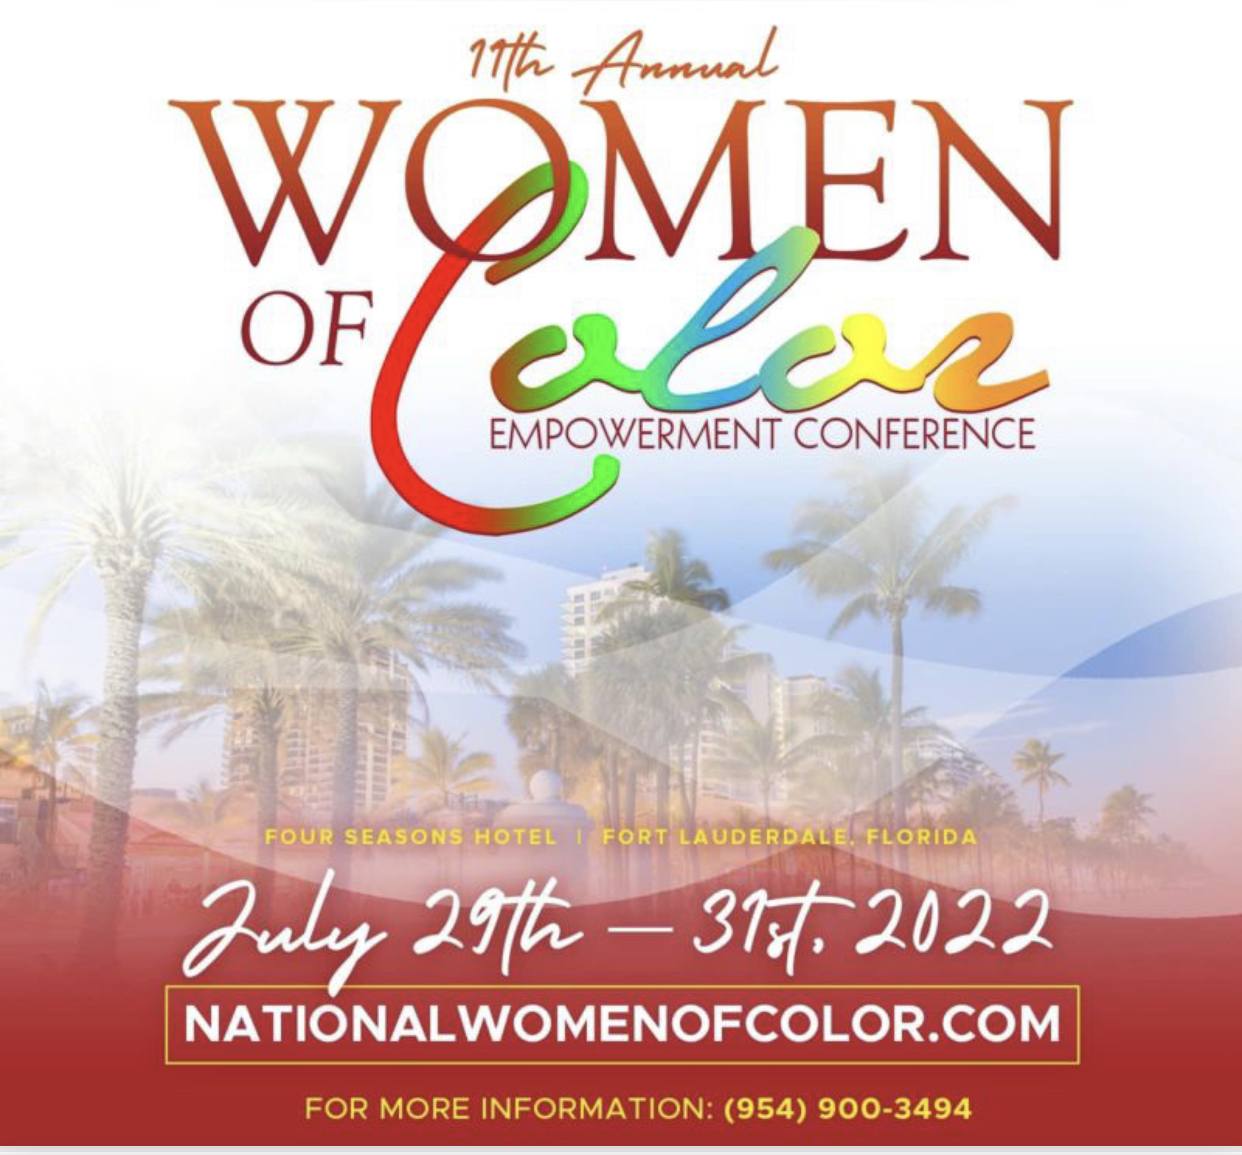 11th Annual Woman of Color Empowerment Conference The Activist Calendar